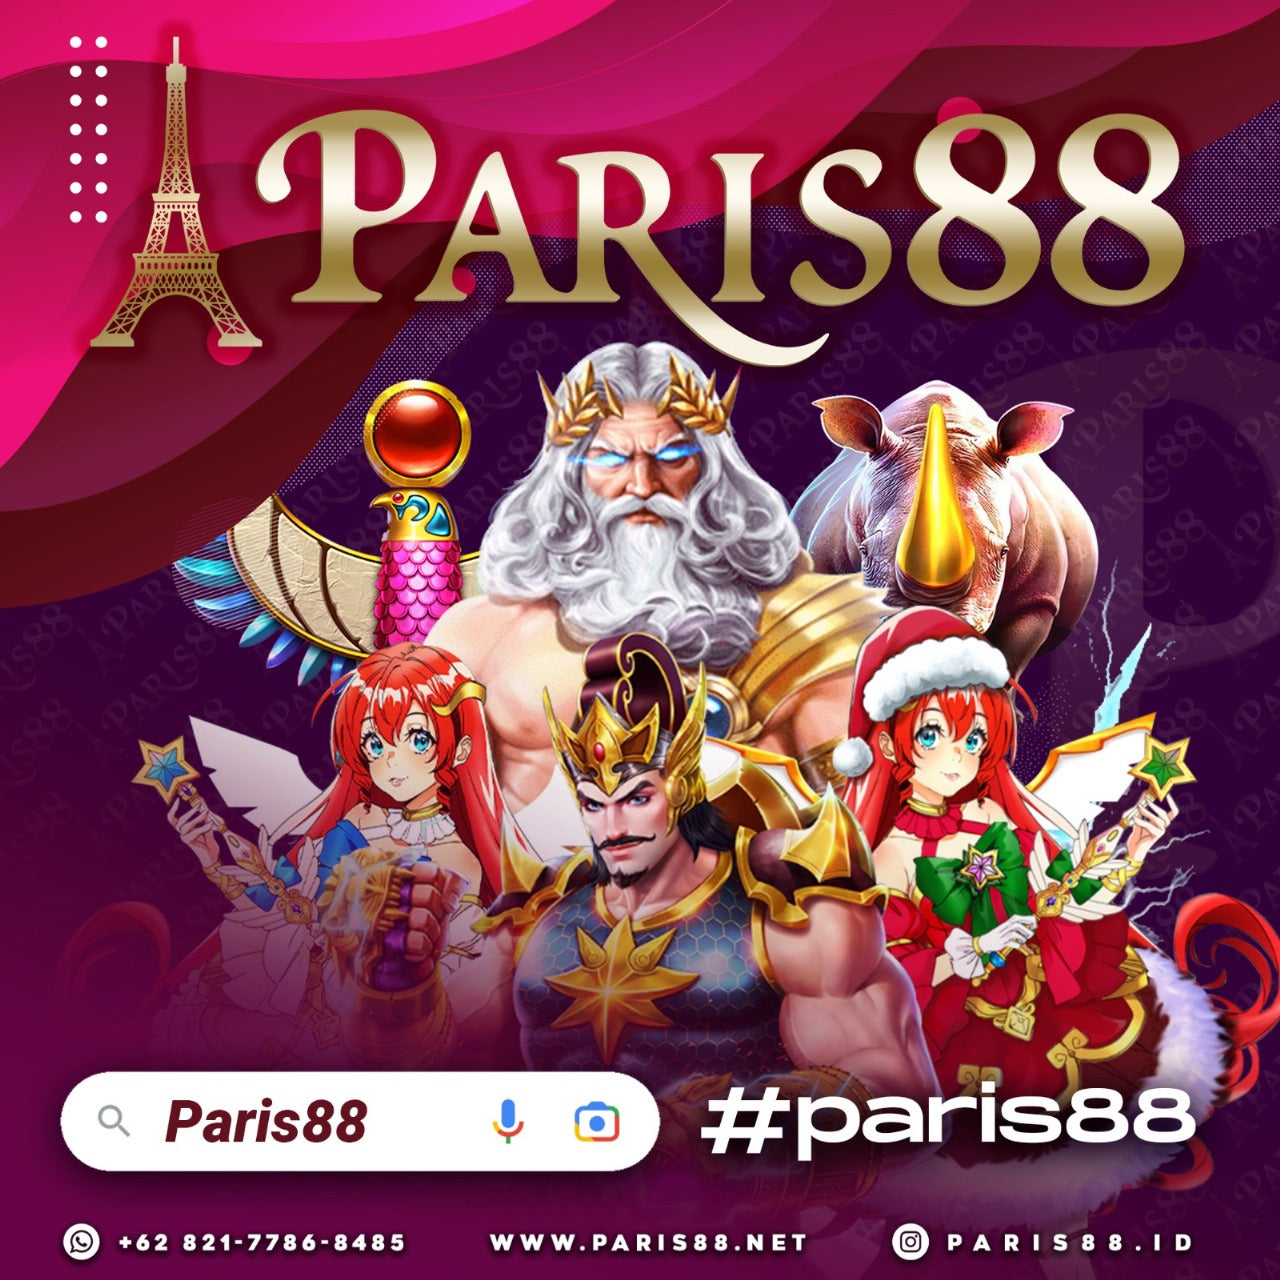 Paris88: The Forefront of Online Gaming in Indonesia | Trusted & Secure